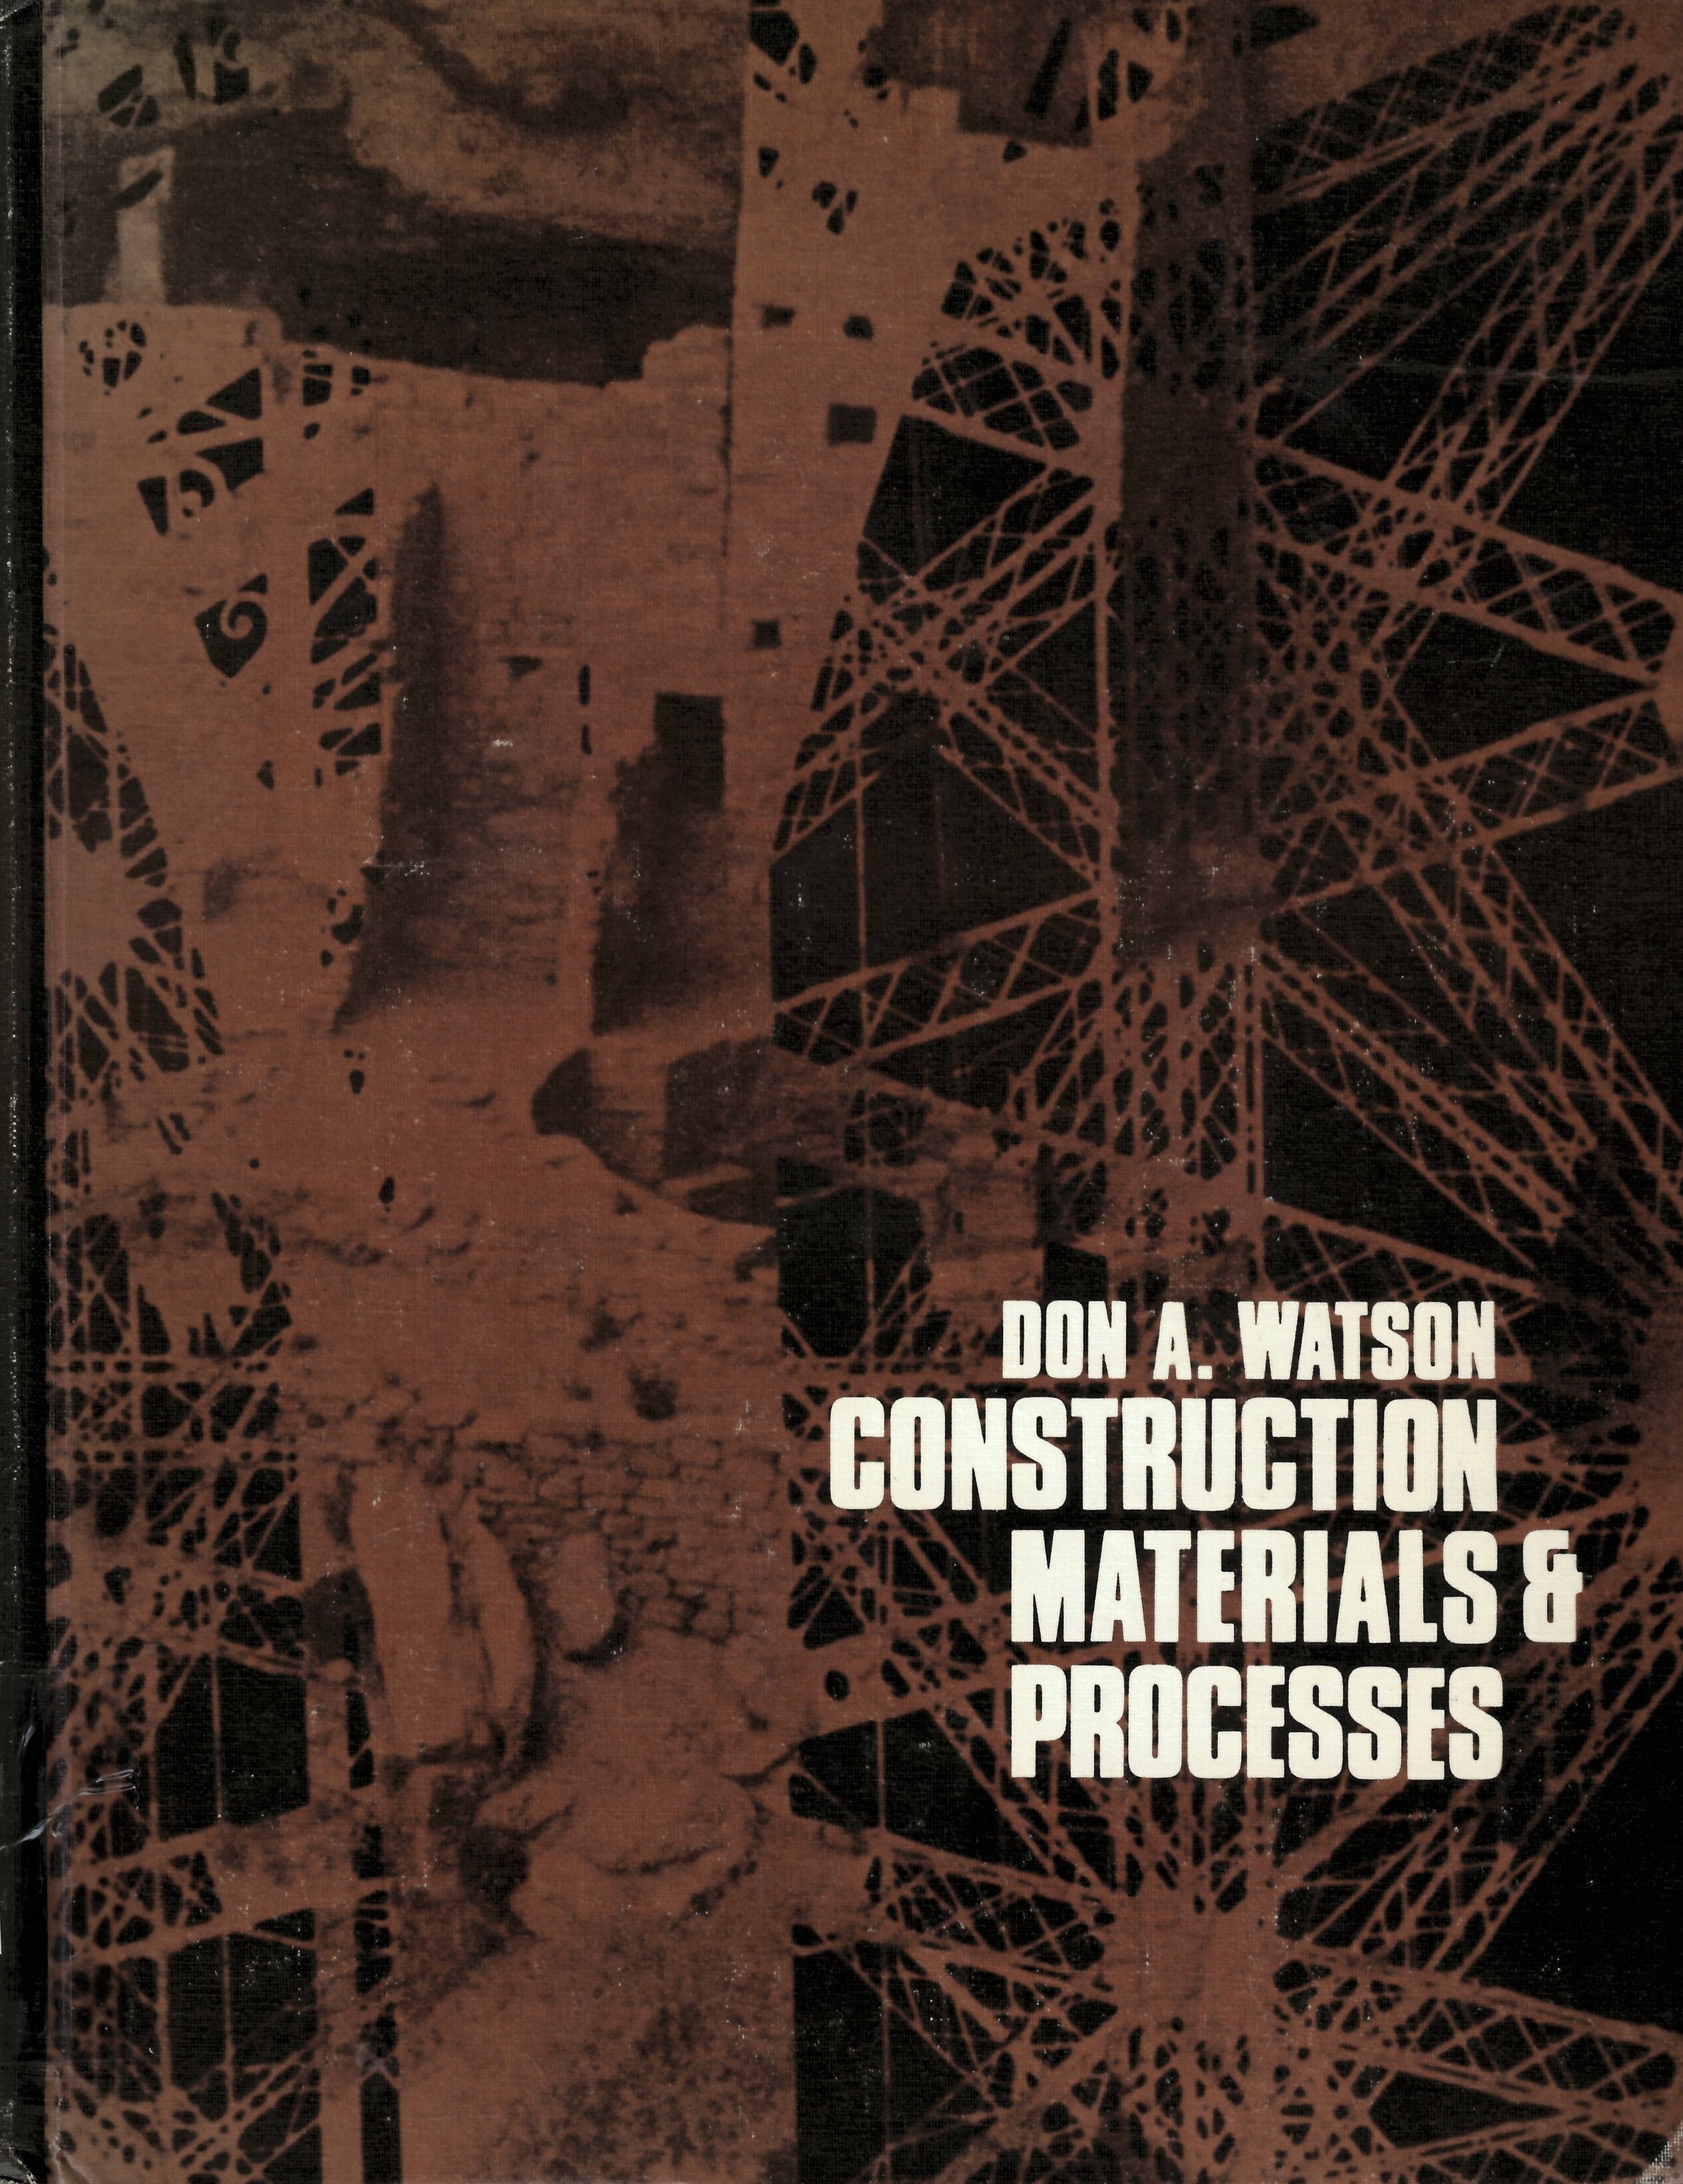 Construction materials and processes